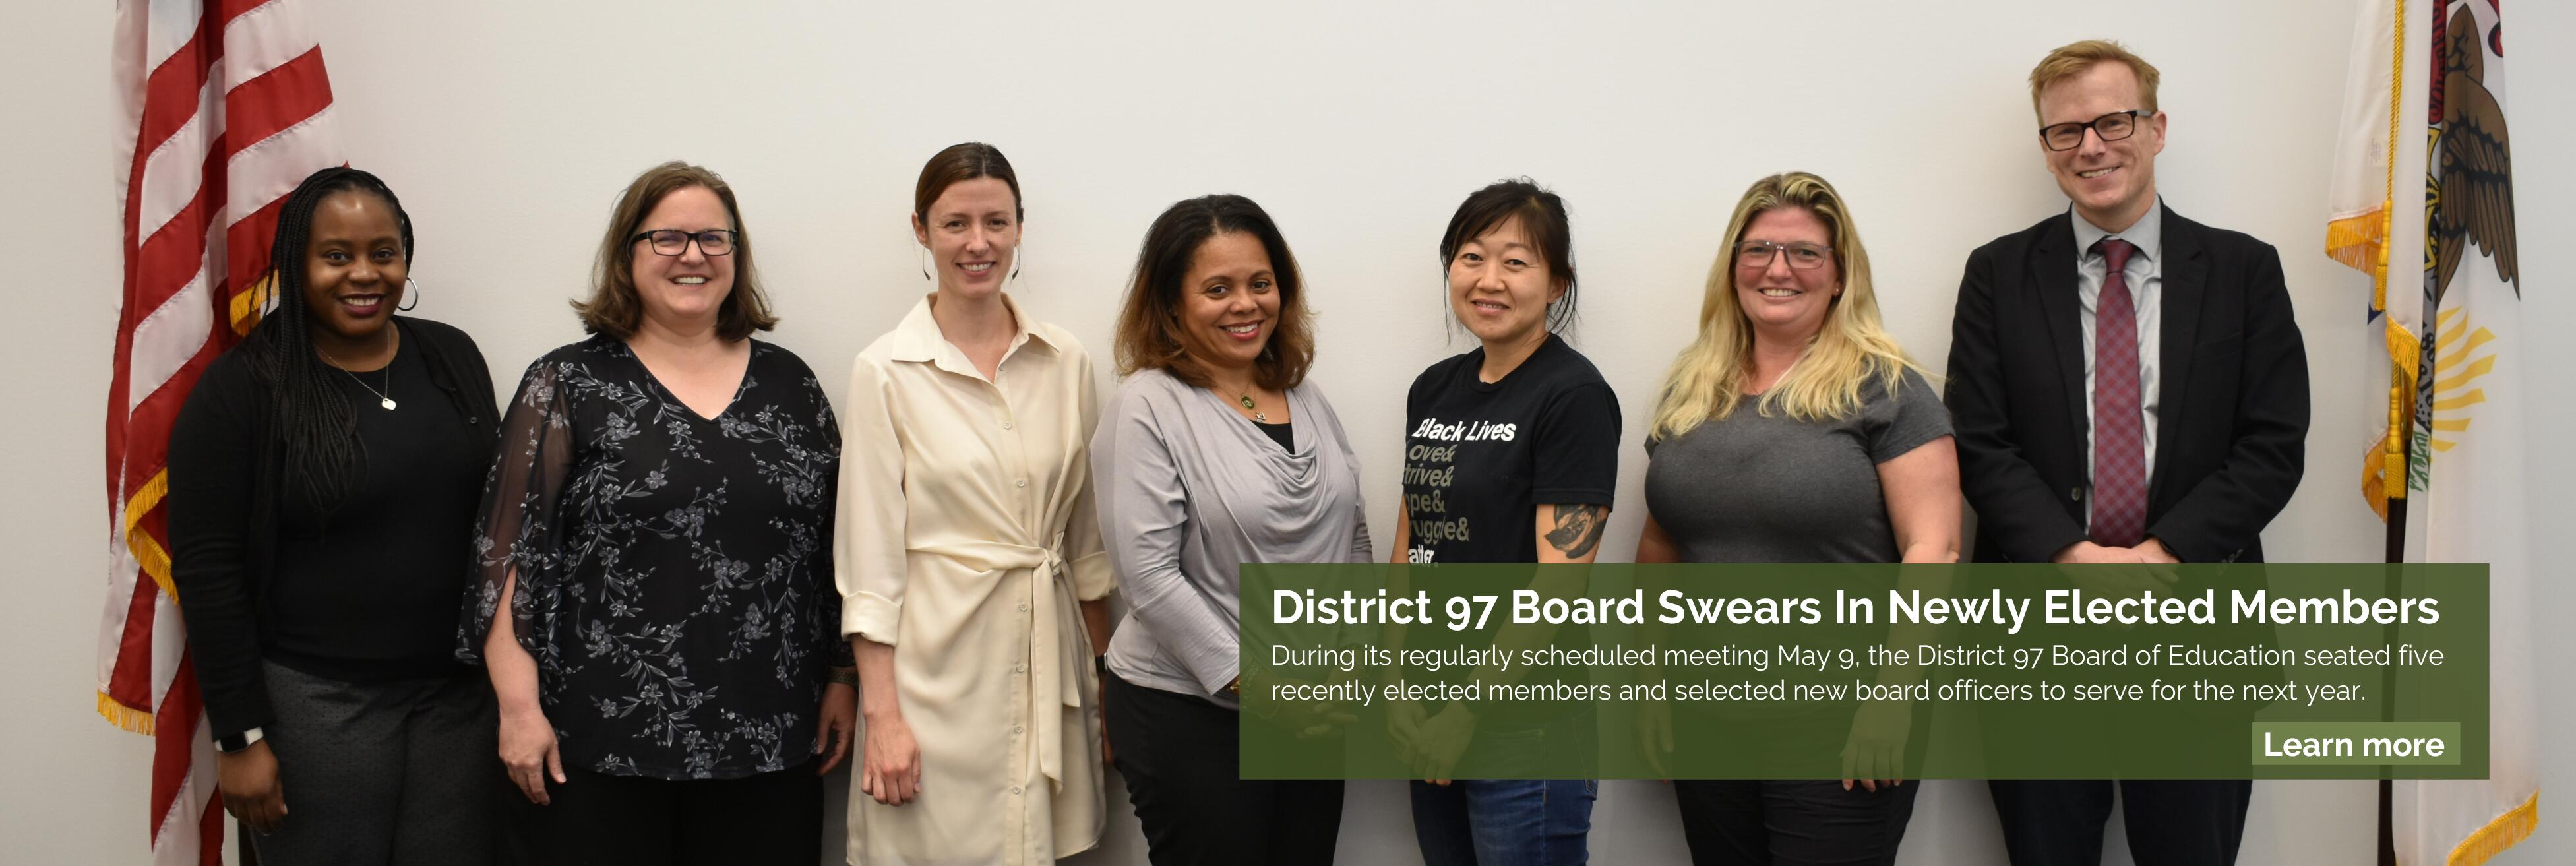 District 97 Board Swears In Newly Elected Members, Selects New Board Officers